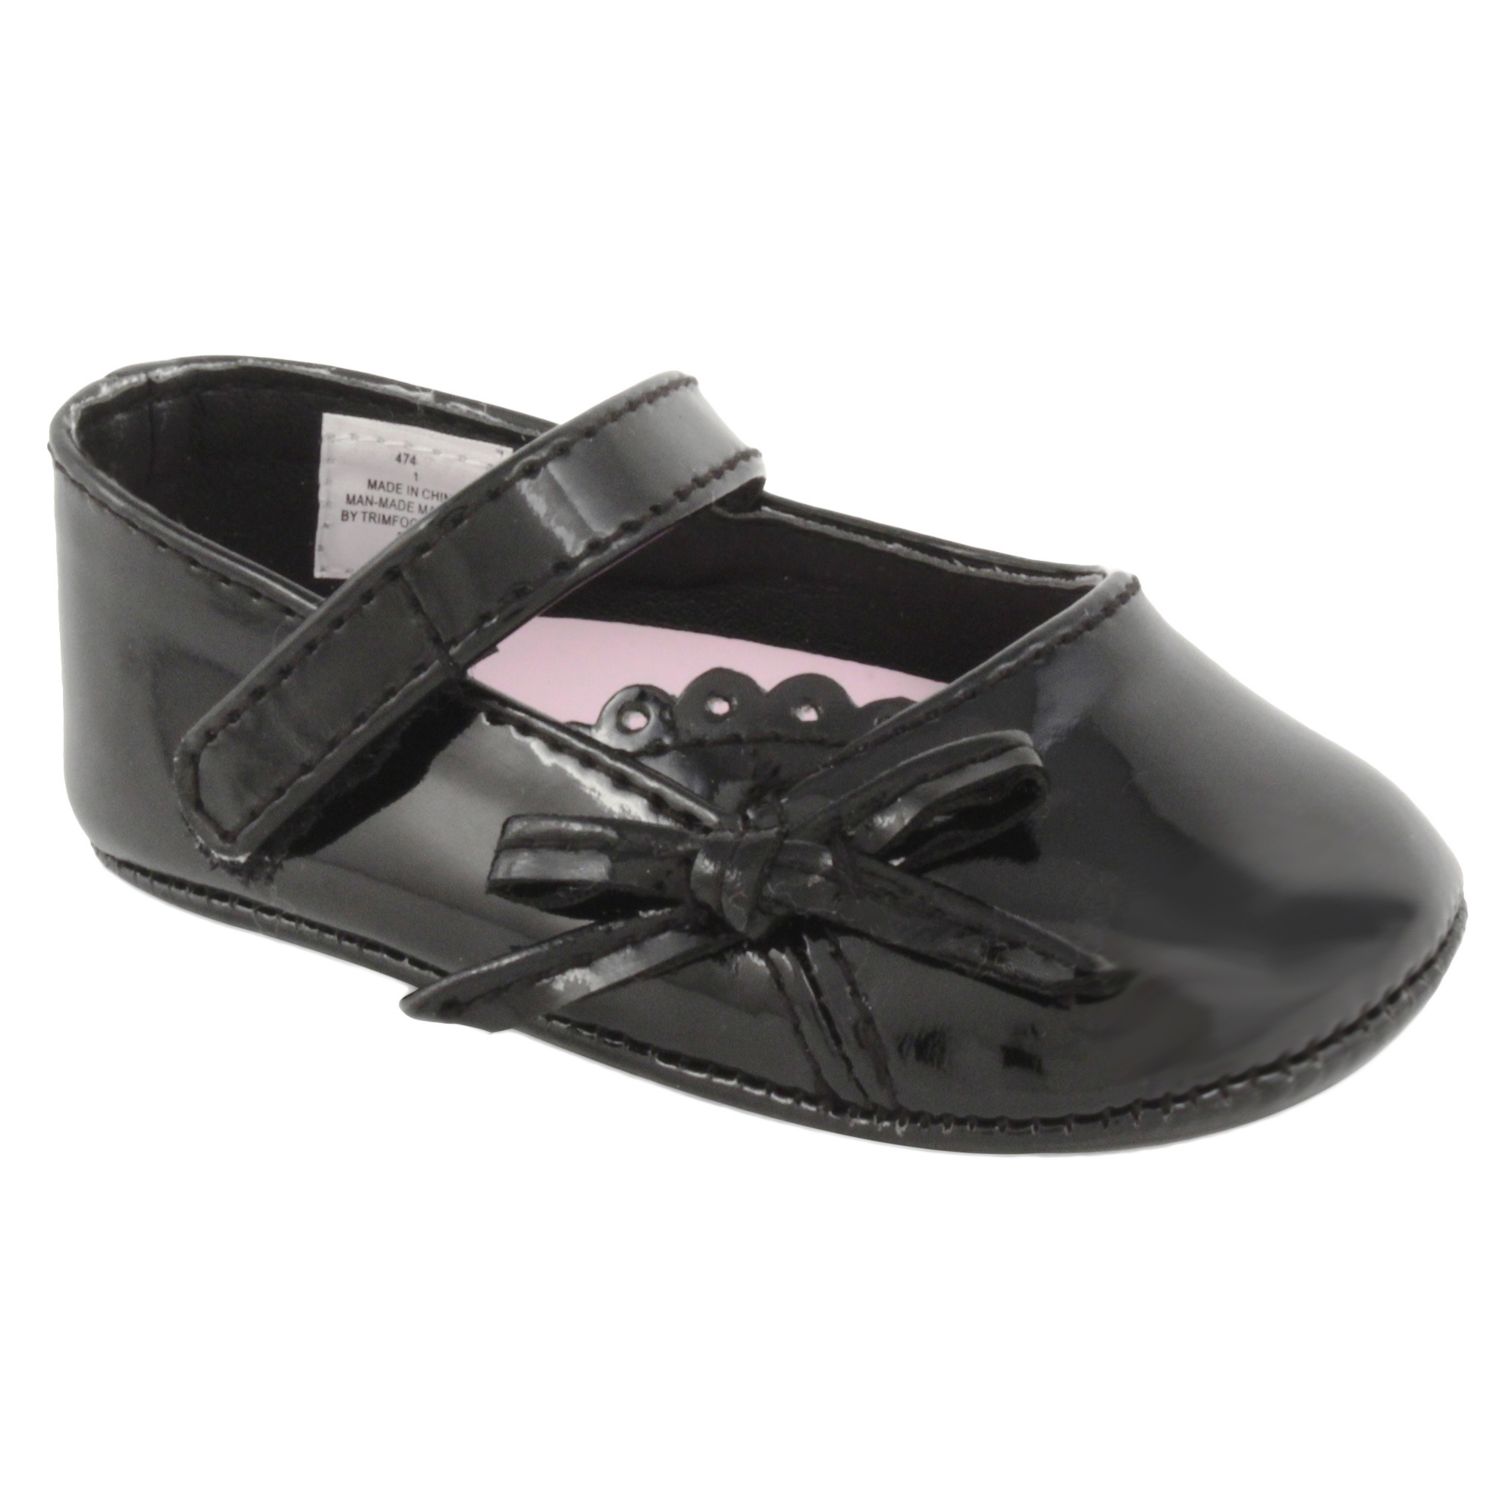 girls patent leather mary janes